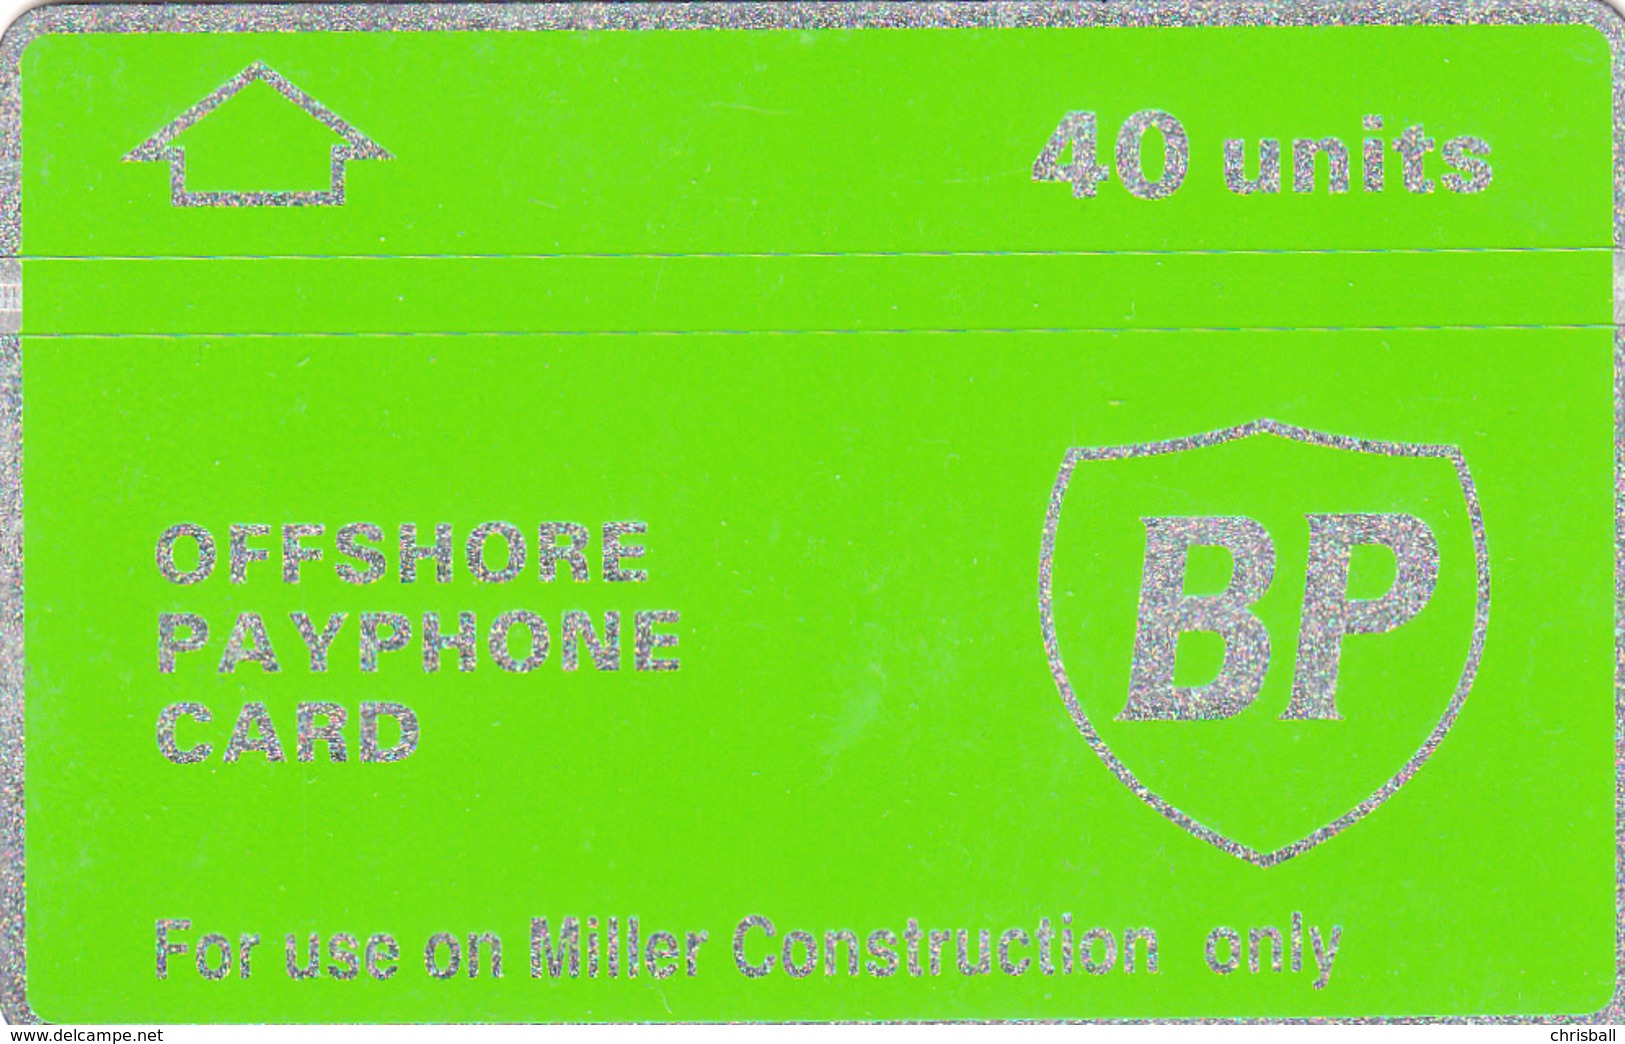 BT Oil Rig Phonecard - British Petroleum 40unit (Miller Only) - Superb Fine Used Condition - [ 2] Oil Drilling Rig